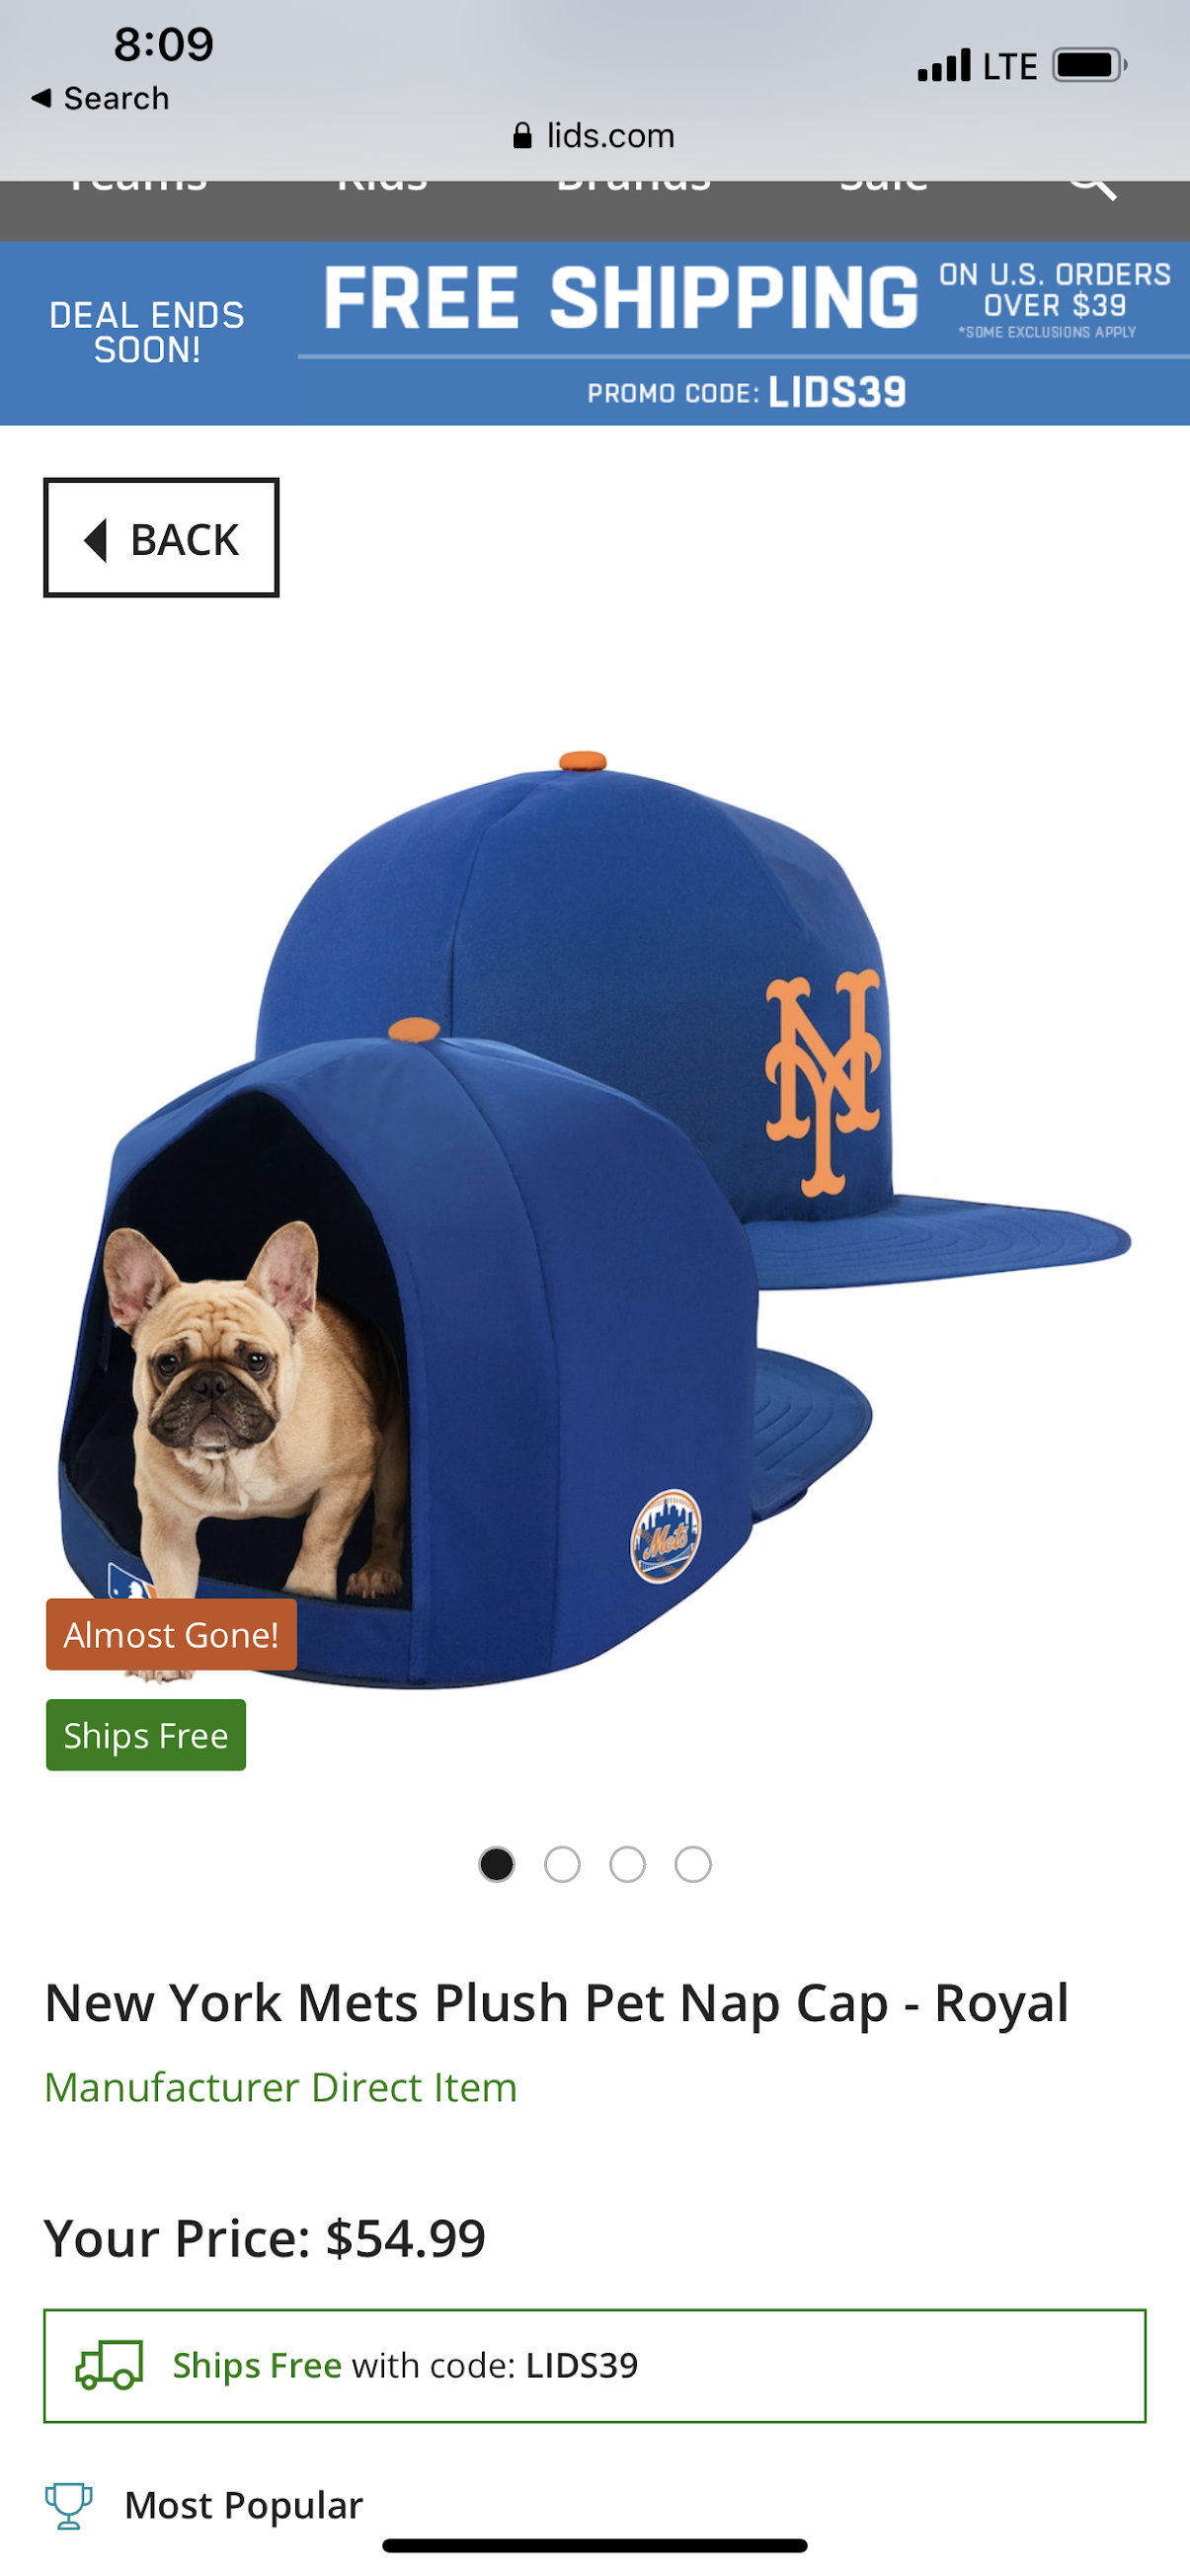  @Mets Ball cap doghouse